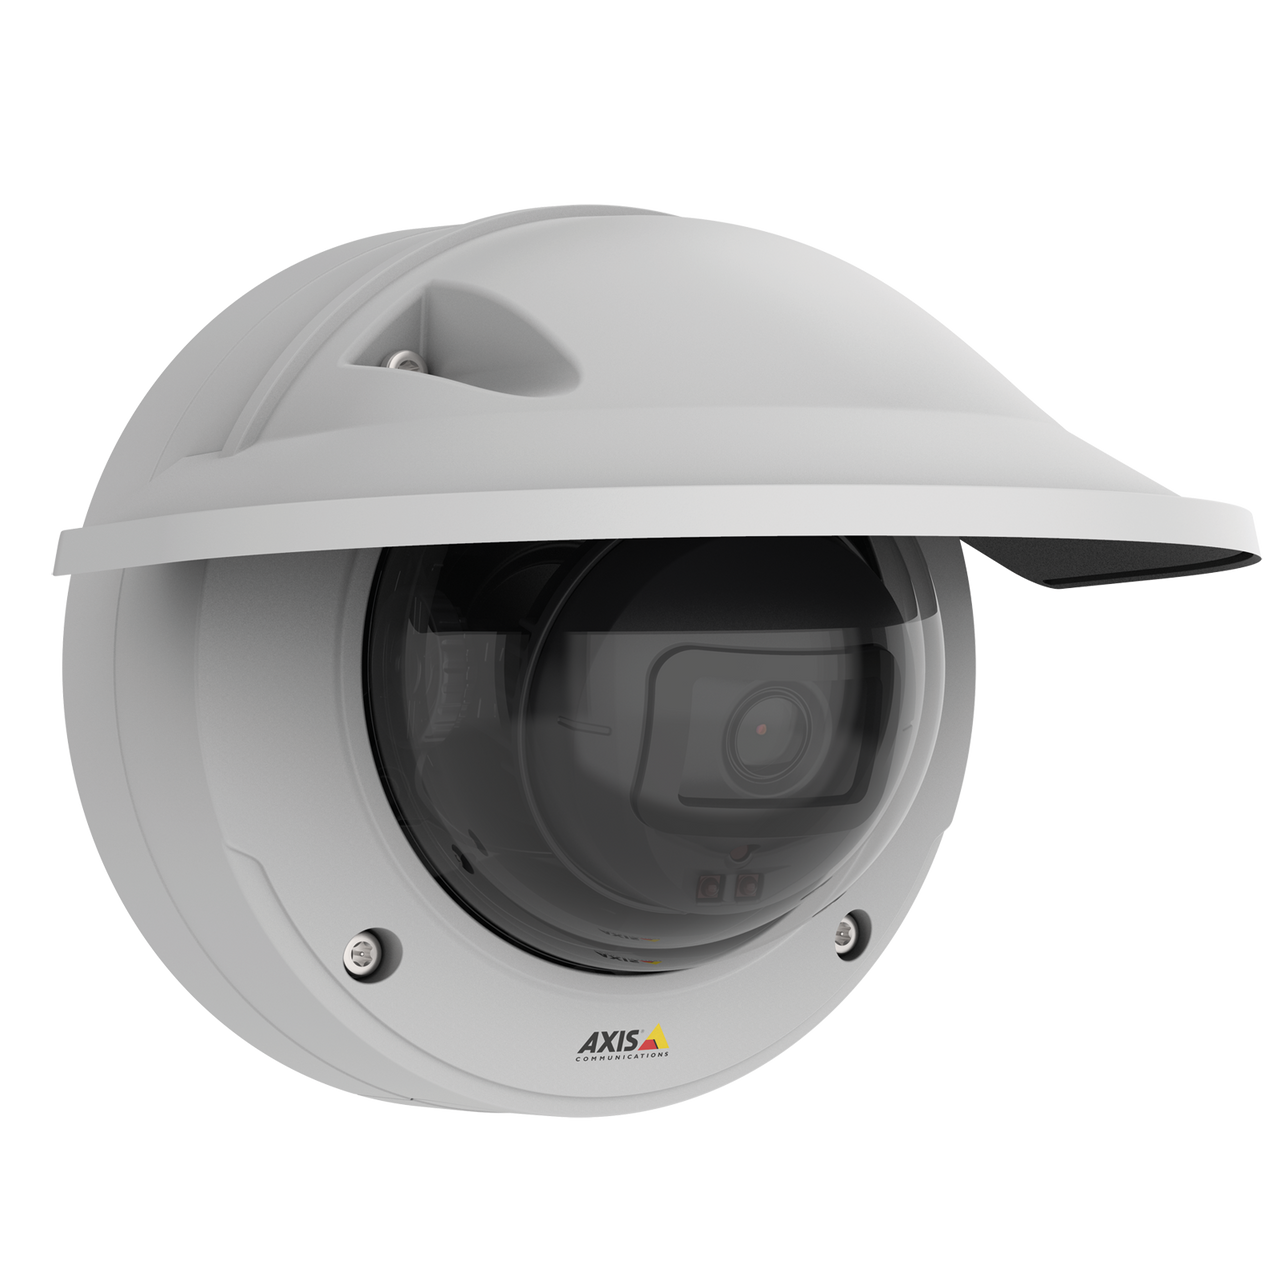 AXIS M3206-LVE Robust wide-angle surveillance in 4 MP with IR